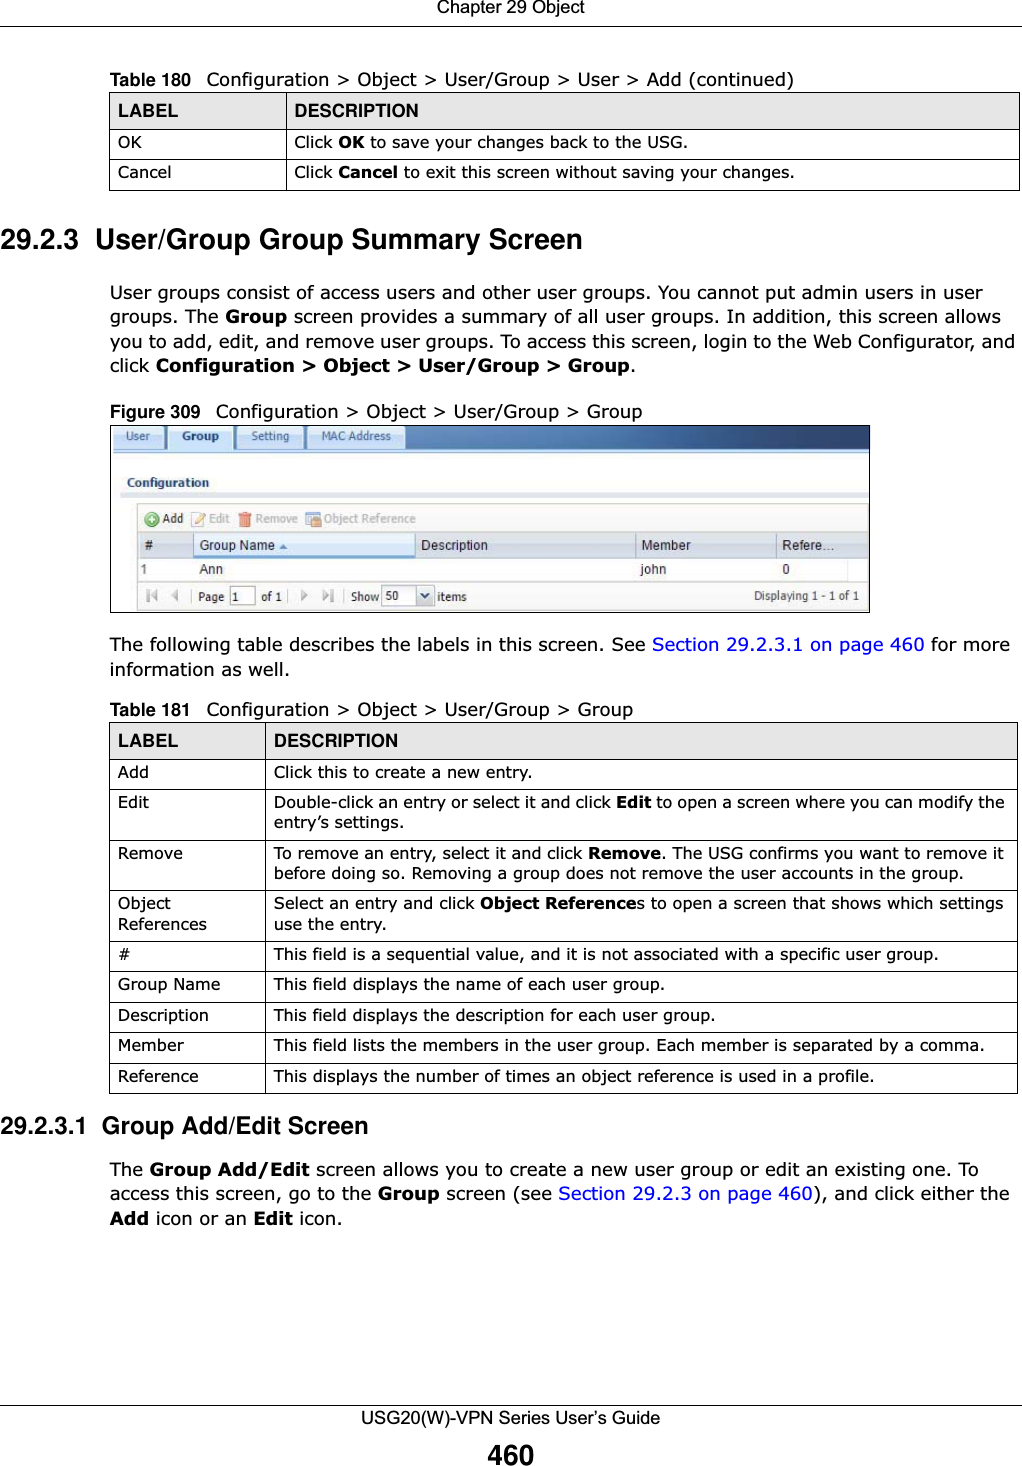 Chapter 29 ObjectUSG20(W)-VPN Series User’s Guide46029.2.3  User/Group Group Summary ScreenUser groups consist of access users and other user groups. You cannot put admin users in user groups. The Group screen provides a summary of all user groups. In addition, this screen allows you to add, edit, and remove user groups. To access this screen, login to the Web Configurator, and click Configuration &gt; Object &gt; User/Group &gt; Group.Figure 309   Configuration &gt; Object &gt; User/Group &gt; GroupThe following table describes the labels in this screen. See Section 29.2.3.1 on page 460 for more information as well. 29.2.3.1  Group Add/Edit Screen The Group Add/Edit screen allows you to create a new user group or edit an existing one. To access this screen, go to the Group screen (see Section 29.2.3 on page 460), and click either the Add icon or an Edit icon.OK Click OK to save your changes back to the USG.Cancel Click Cancel to exit this screen without saving your changes.Table 180   Configuration &gt; Object &gt; User/Group &gt; User &gt; Add (continued)LABEL DESCRIPTIONTable 181   Configuration &gt; Object &gt; User/Group &gt; GroupLABEL DESCRIPTIONAdd Click this to create a new entry.Edit Double-click an entry or select it and click Edit to open a screen where you can modify the entry’s settings. Remove To remove an entry, select it and click Remove. The USG confirms you want to remove it before doing so. Removing a group does not remove the user accounts in the group.Object ReferencesSelect an entry and click Object References to open a screen that shows which settings use the entry.# This field is a sequential value, and it is not associated with a specific user group.Group Name This field displays the name of each user group.Description This field displays the description for each user group.Member This field lists the members in the user group. Each member is separated by a comma.Reference This displays the number of times an object reference is used in a profile.